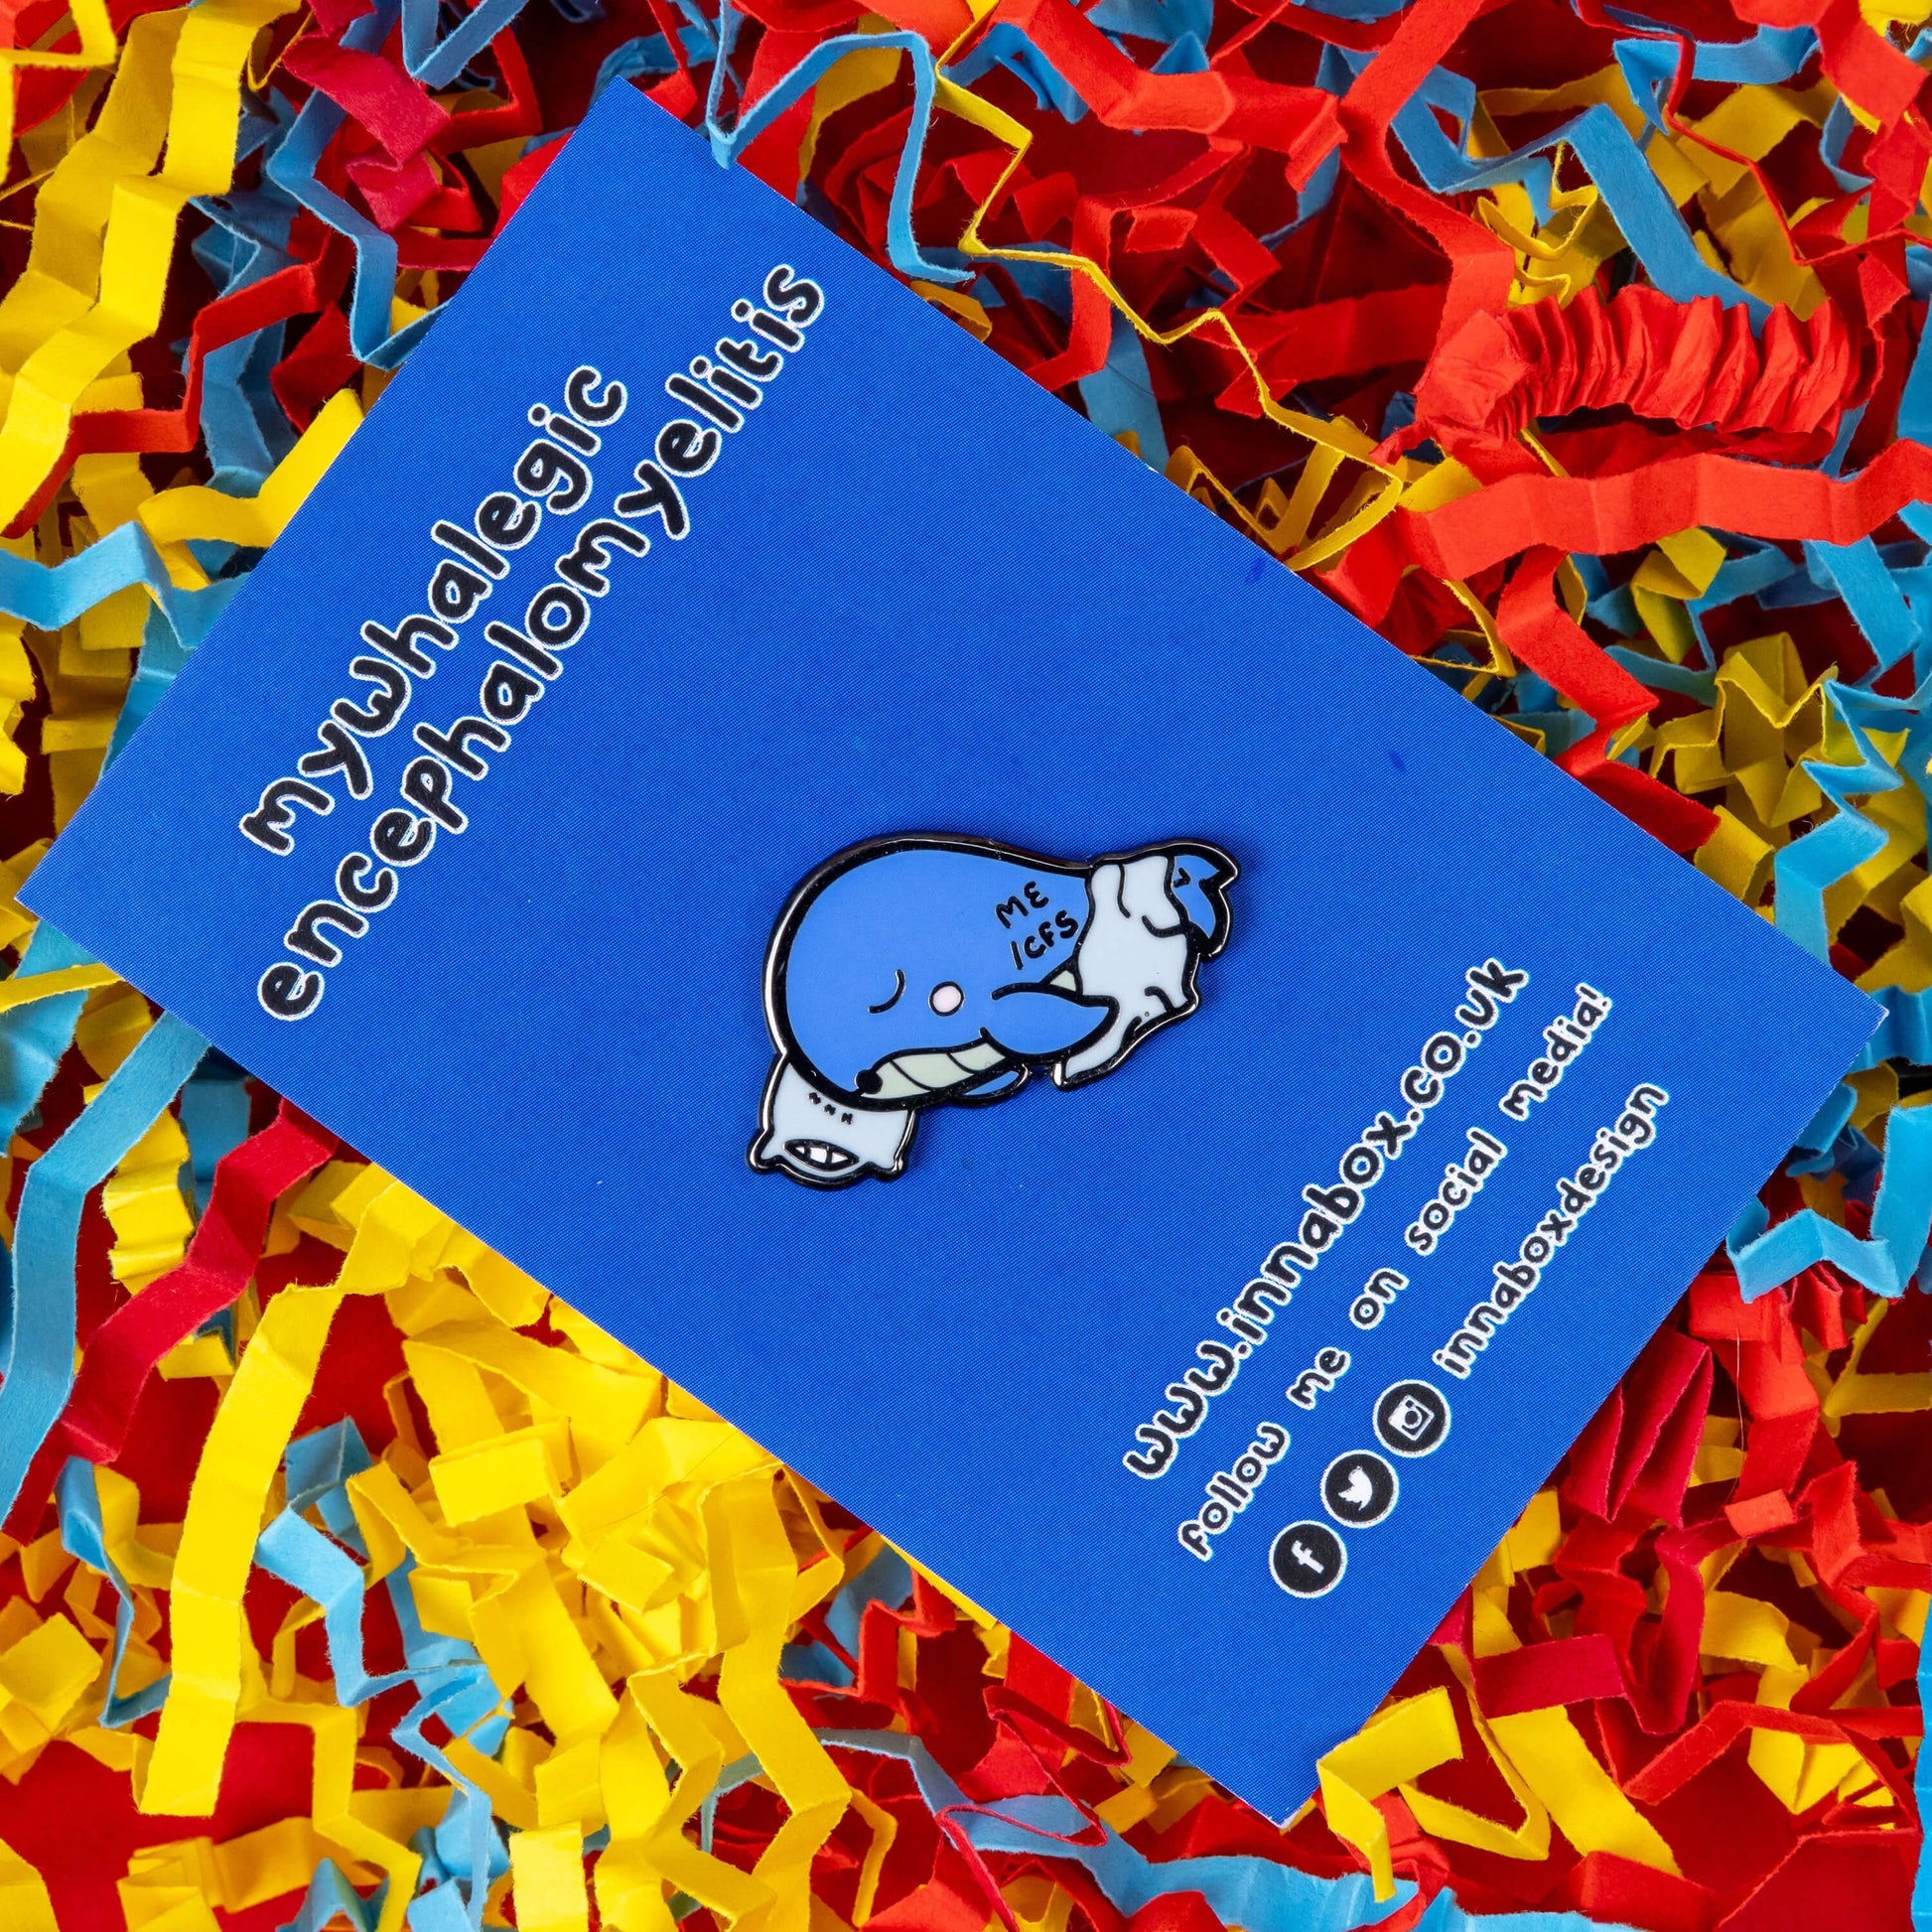 Mywhalegic Enamel Pin - Myalgic Encephalomyelitis (ME/CFS) on blue backing card on a red, blue and yellow coloured card confetti background. The enamel pin is a sleeping blue whale laying on a white pillow with a white blanket over it and ME/CFS written on its back. The enamel pin is designed to raise awareness for Myalgic encephalomyelitis or chronic fatigue syndrome